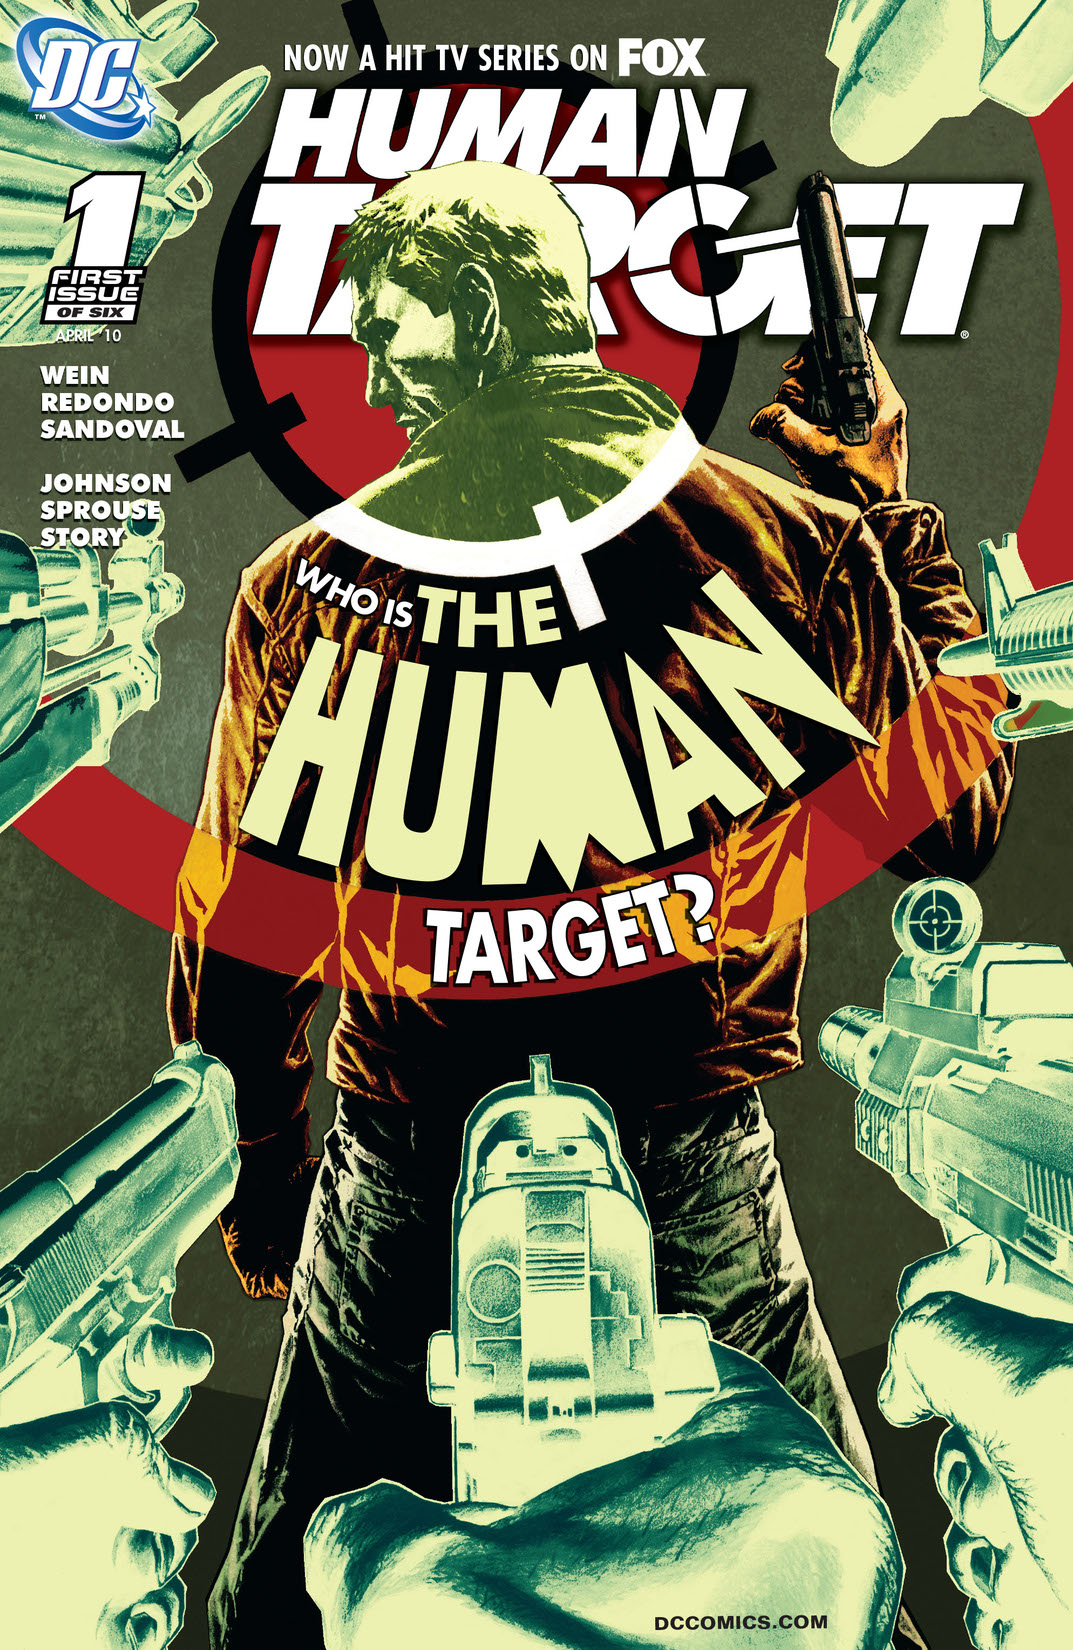 Human Target #1 preview images